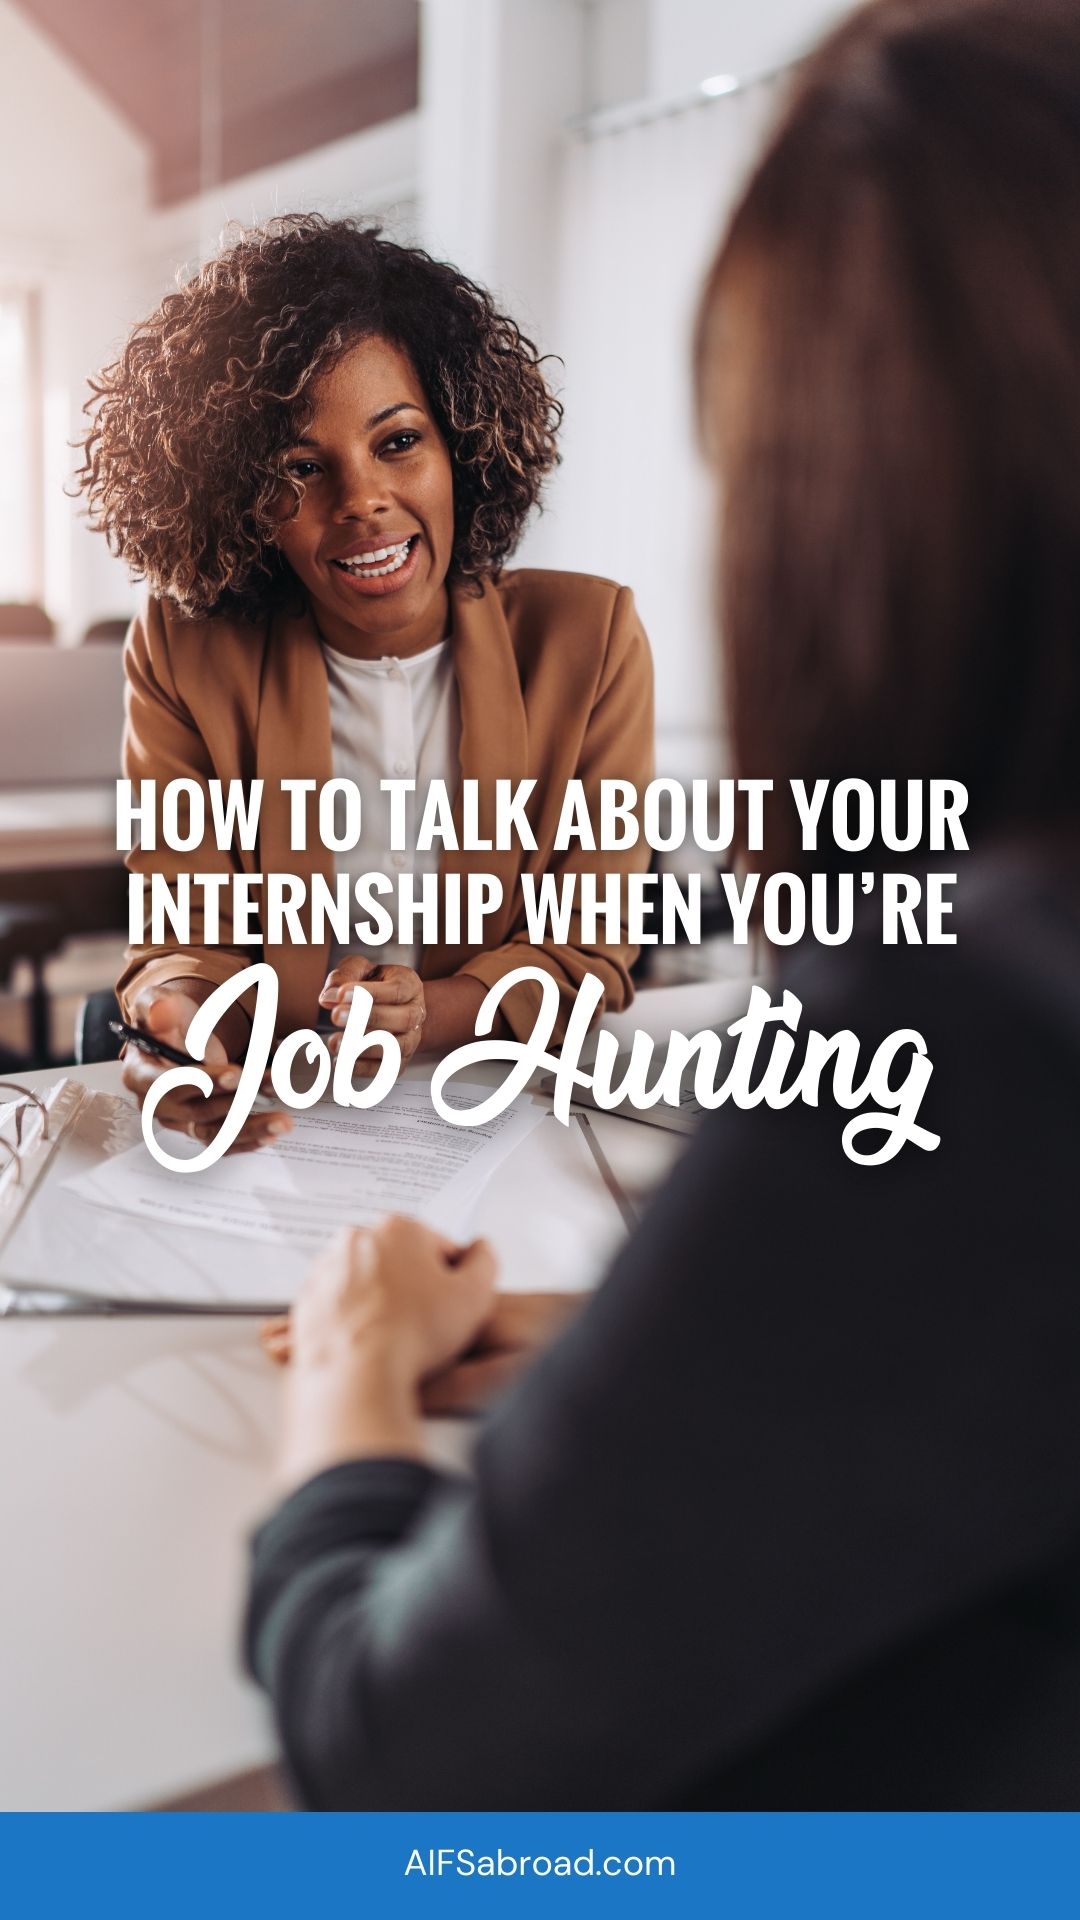 Pin image: Young woman interviewing for a job with text overlay "How to Talk About Your Internship When You're Job Hunting"